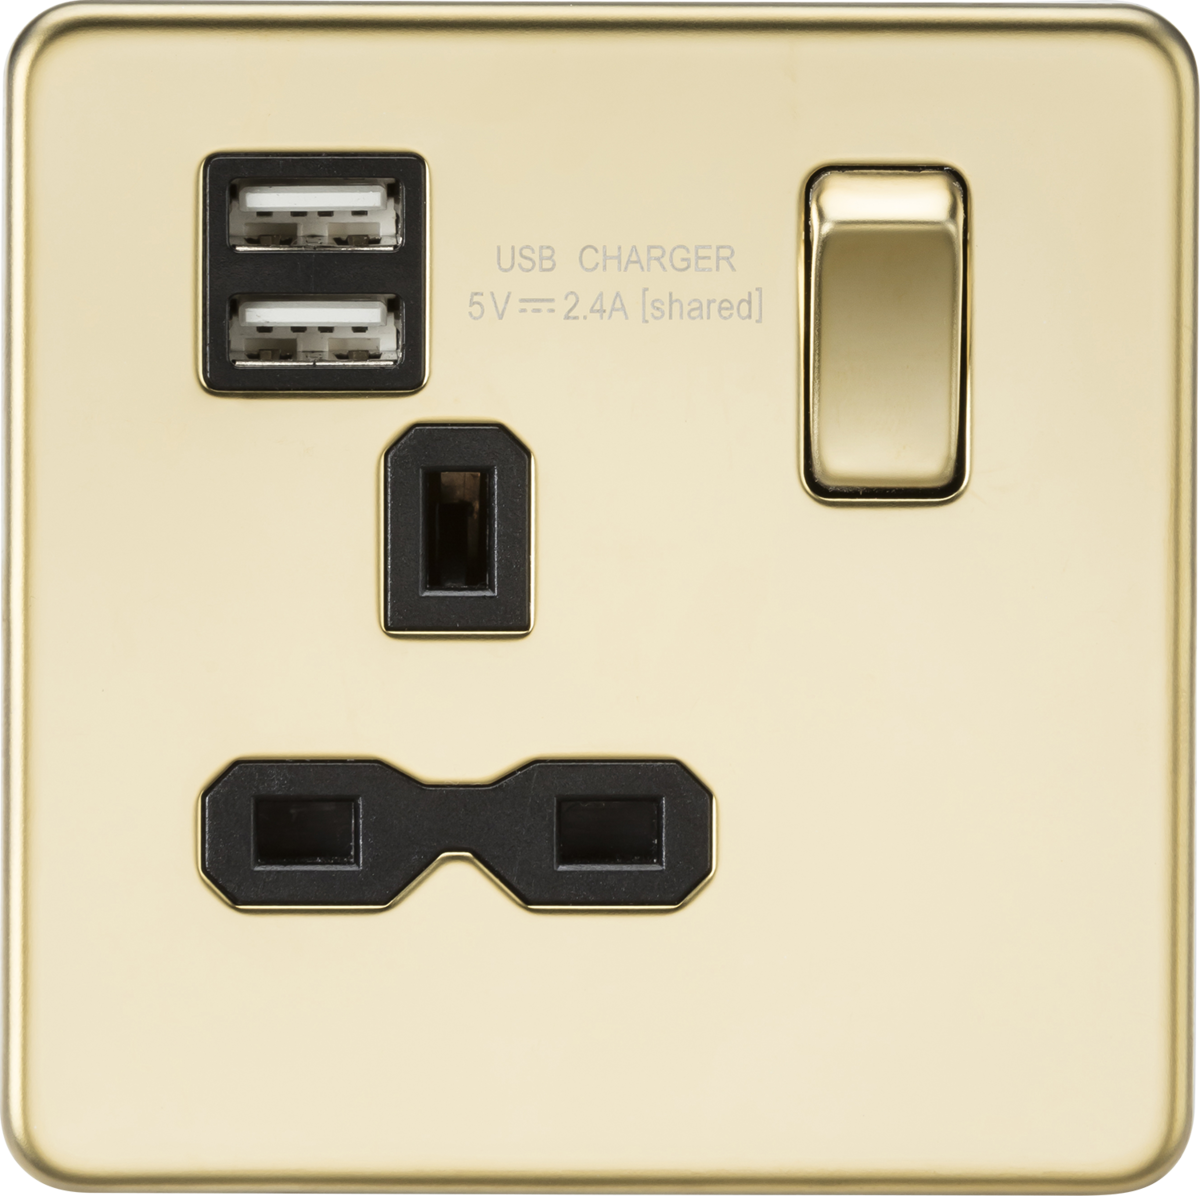 Screwless 13A 1G switched socket with dual USB charger (2.4A) - polished brass with black insert